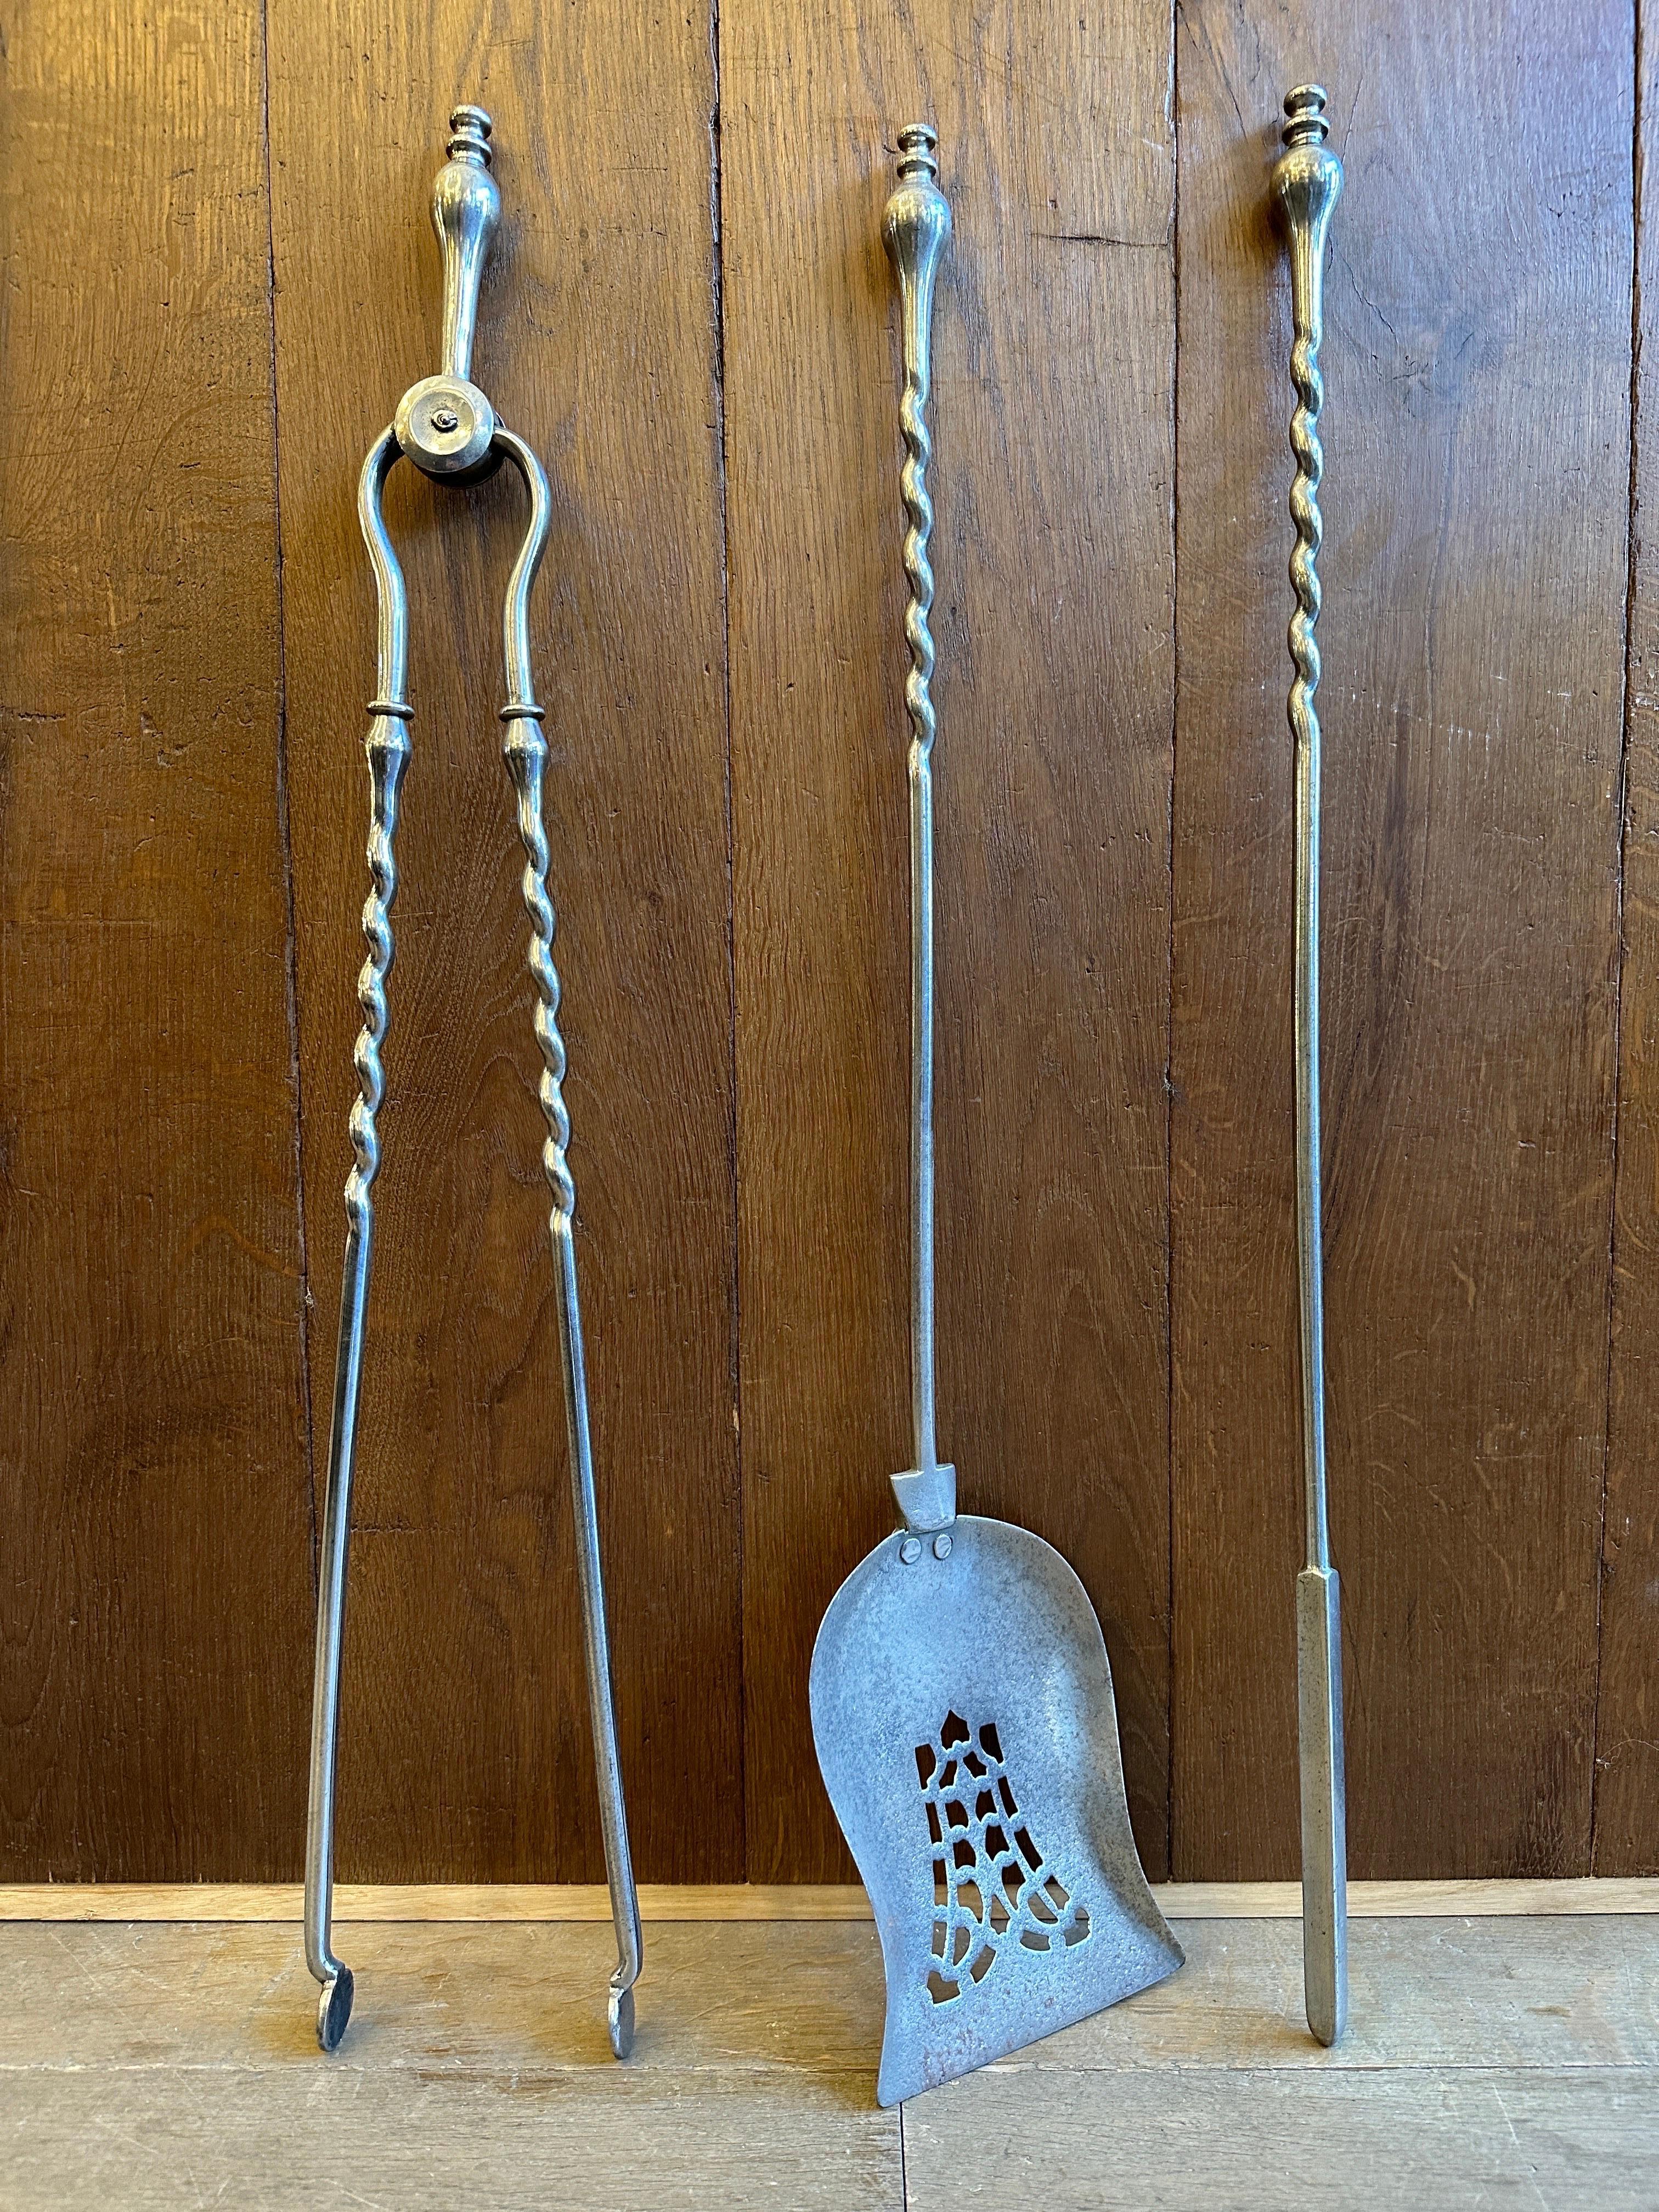 A set of polished barley twist fire irons/tools from the early to mid 19th century. In good order with finial handles, Barley twist stems, pierced shovel.
English late Regency or Early Victorian period 